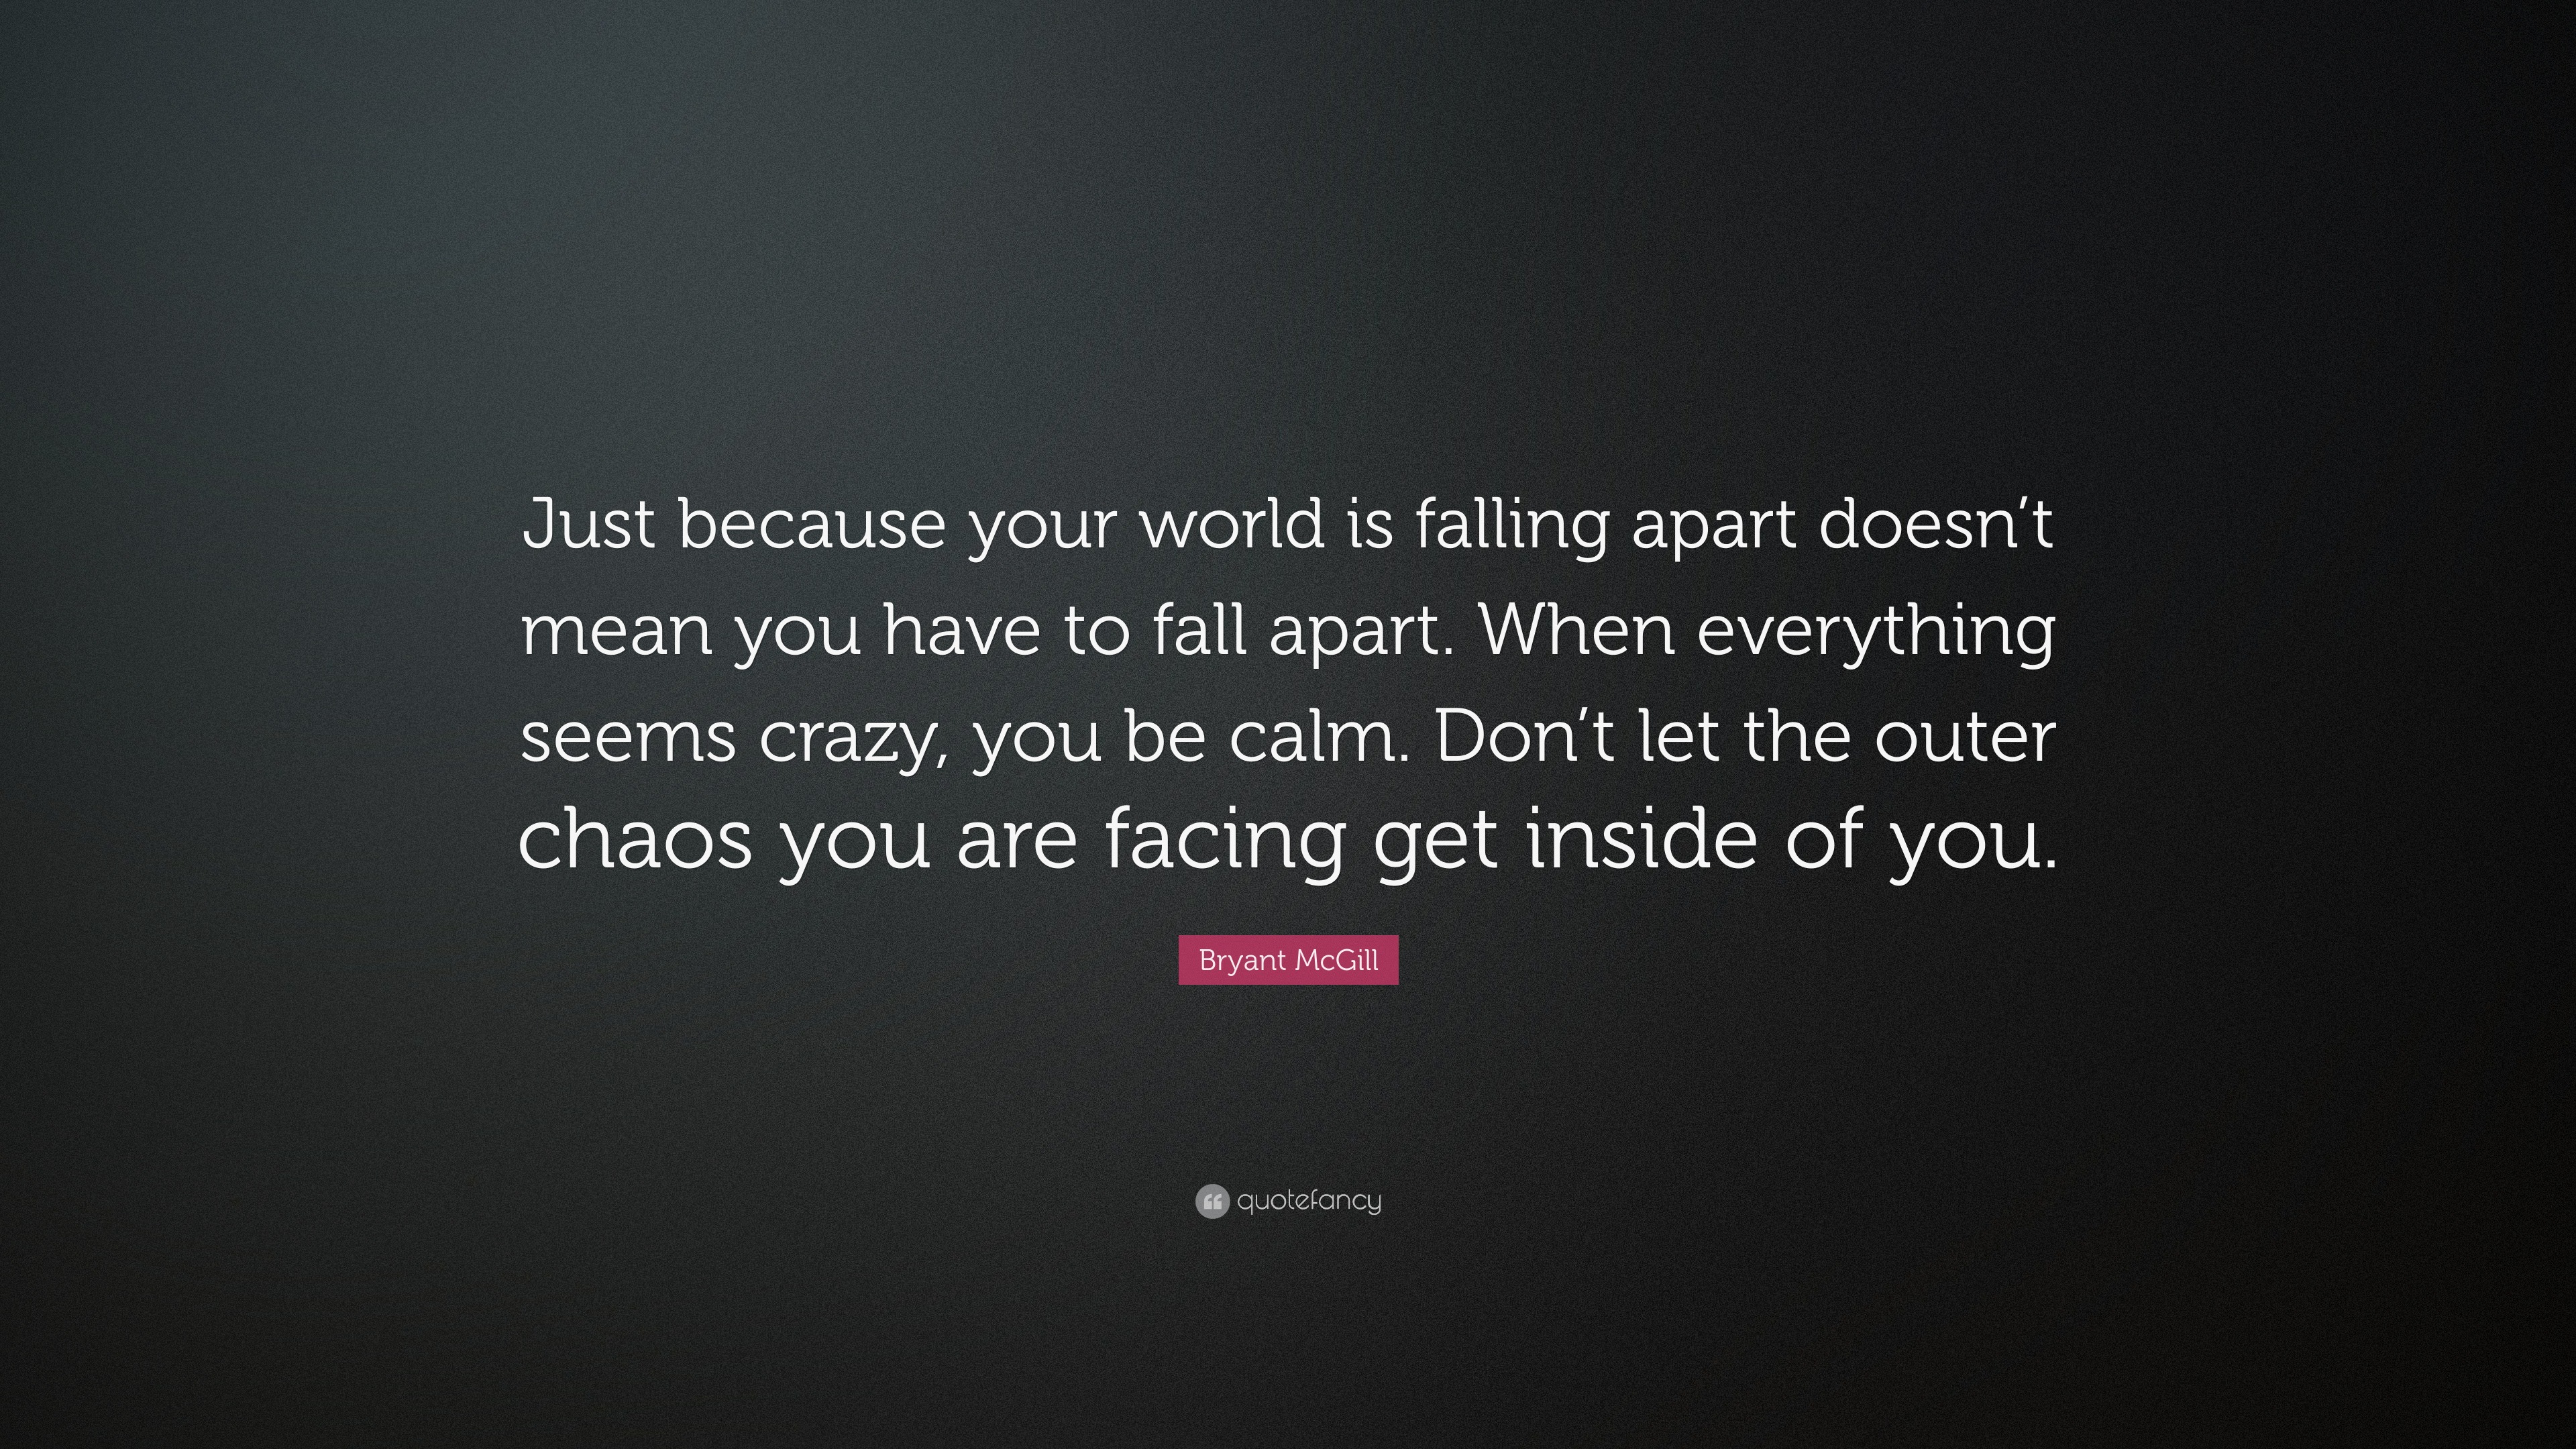 Bryant McGill Quote “Just because your world is falling apart doesn’t